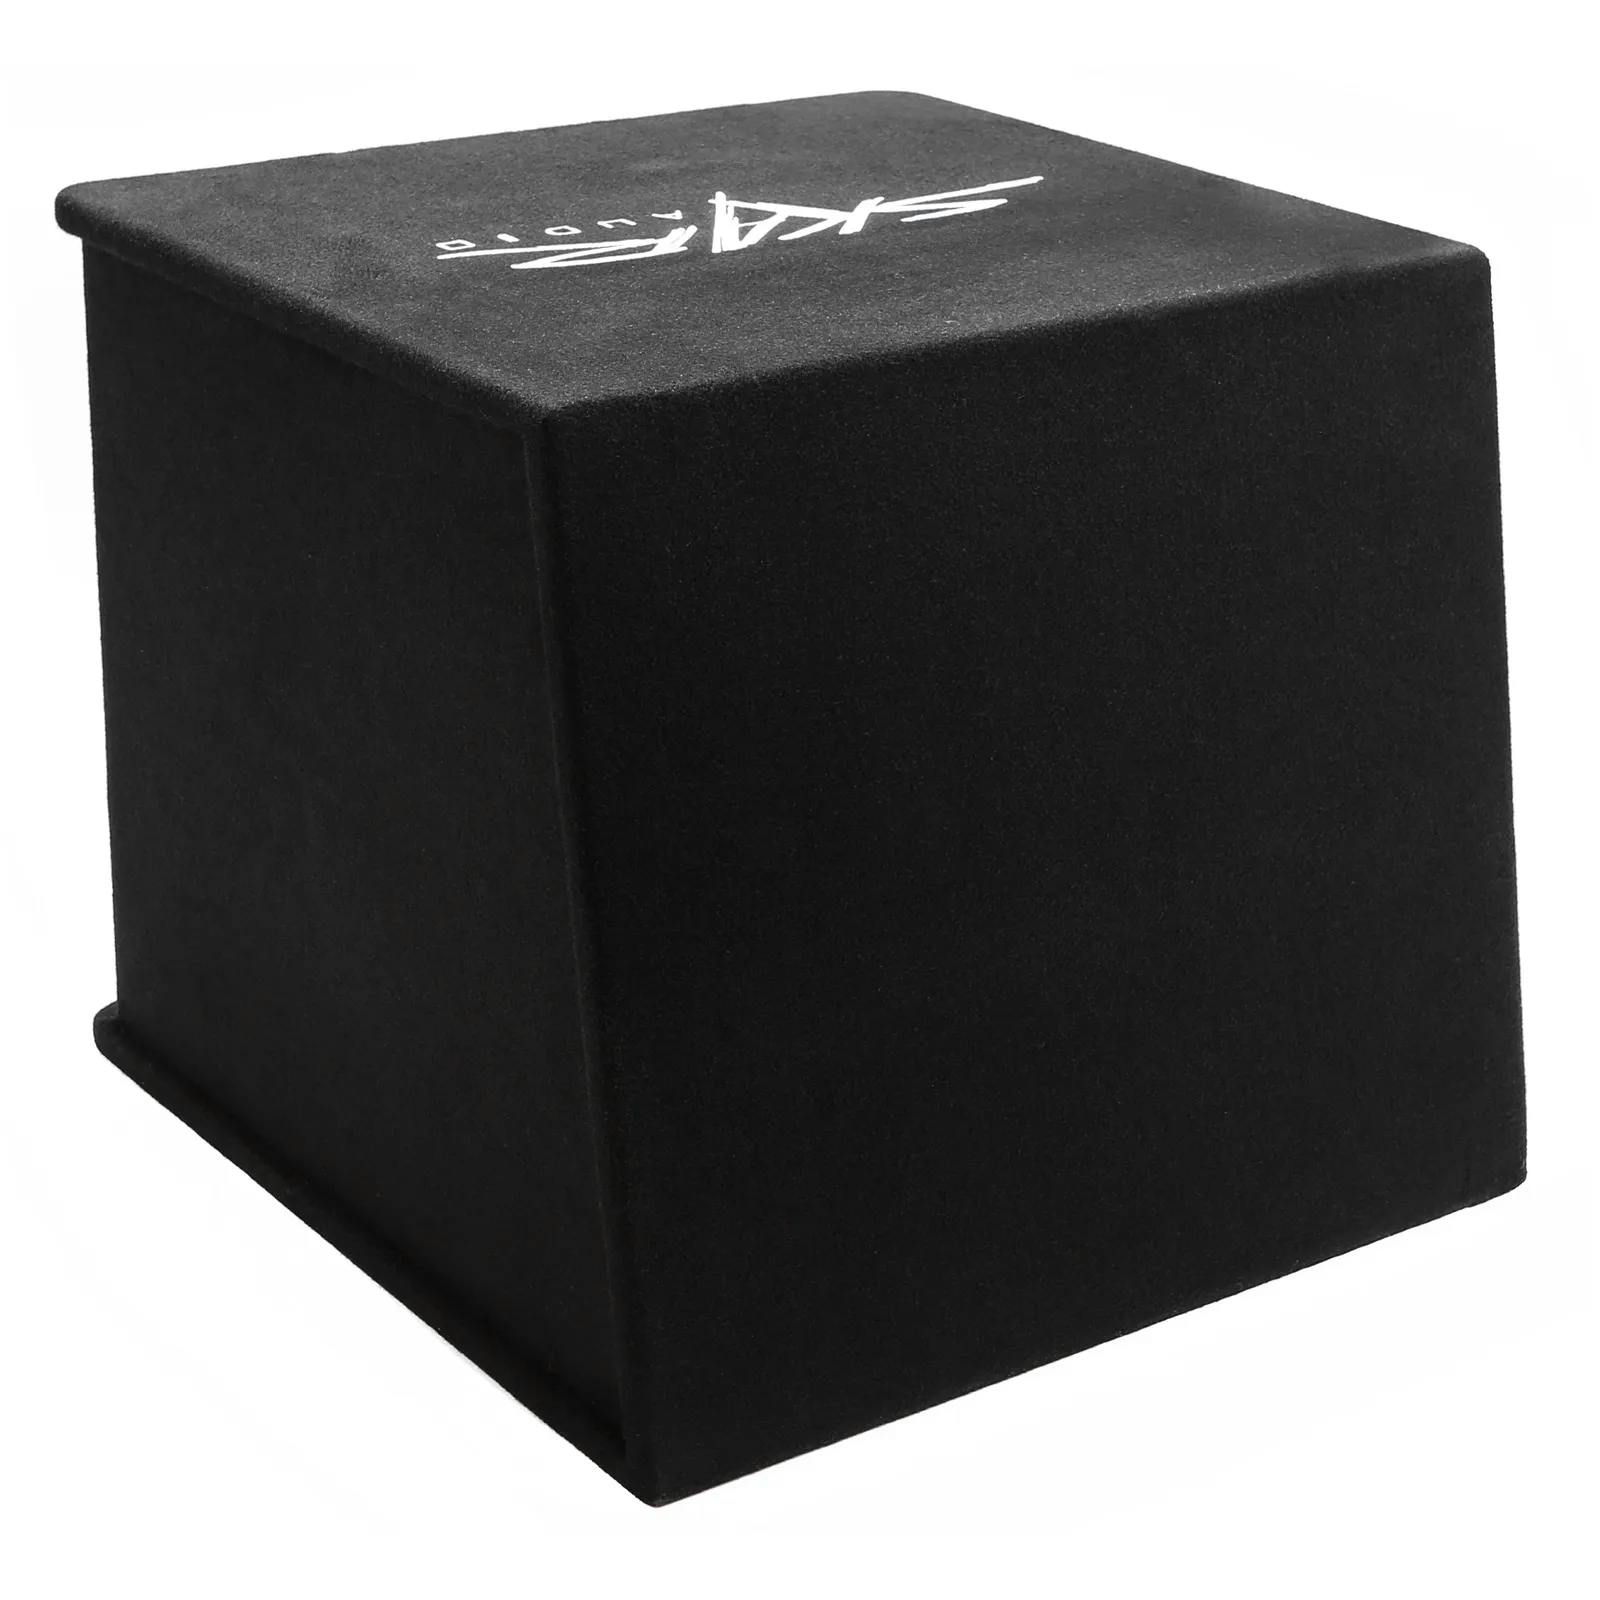 Featured Product Photo 2 for SDR-1X15D2 | Single 15" 1,200 Watt SDR Series Loaded Vented Subwoofer Enclosure